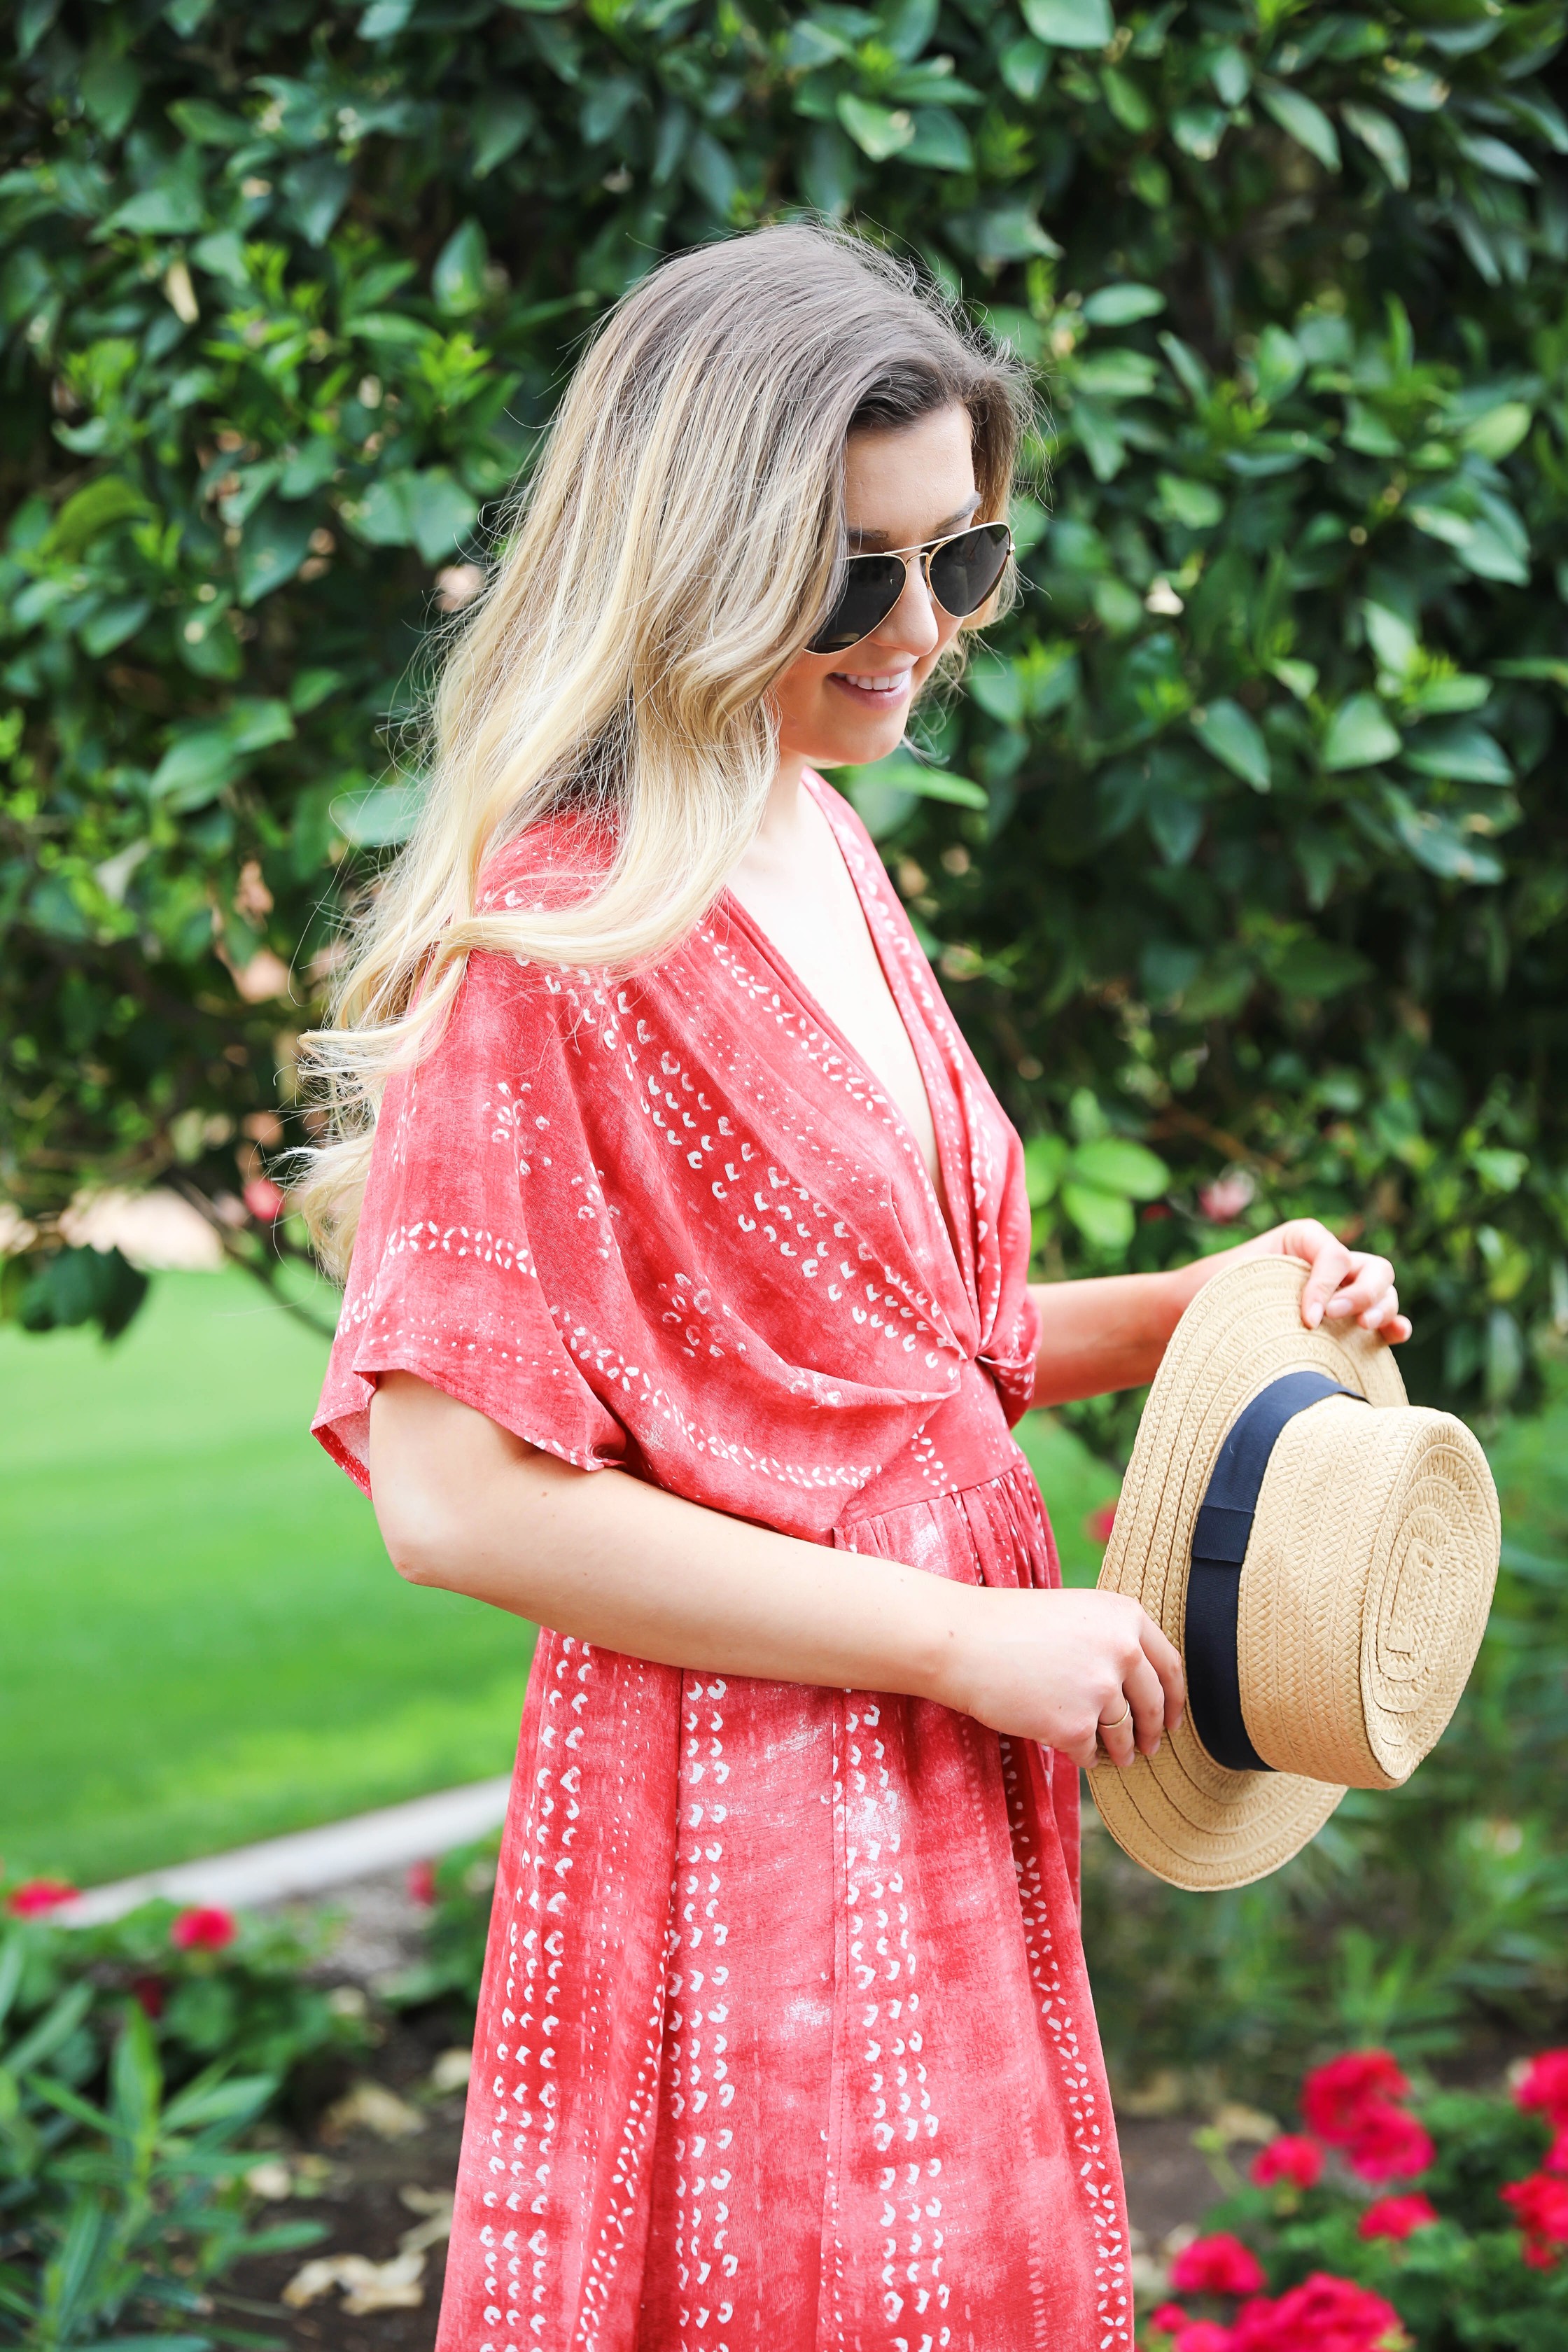 Red tie dye maxi dress from Showpo! Maxi dress with a cute plunging neckline paired with astraw hat and Marc fisher wedges! Details on fashion blog daily dose of charm by lauren lindmark spring break outfit ideas